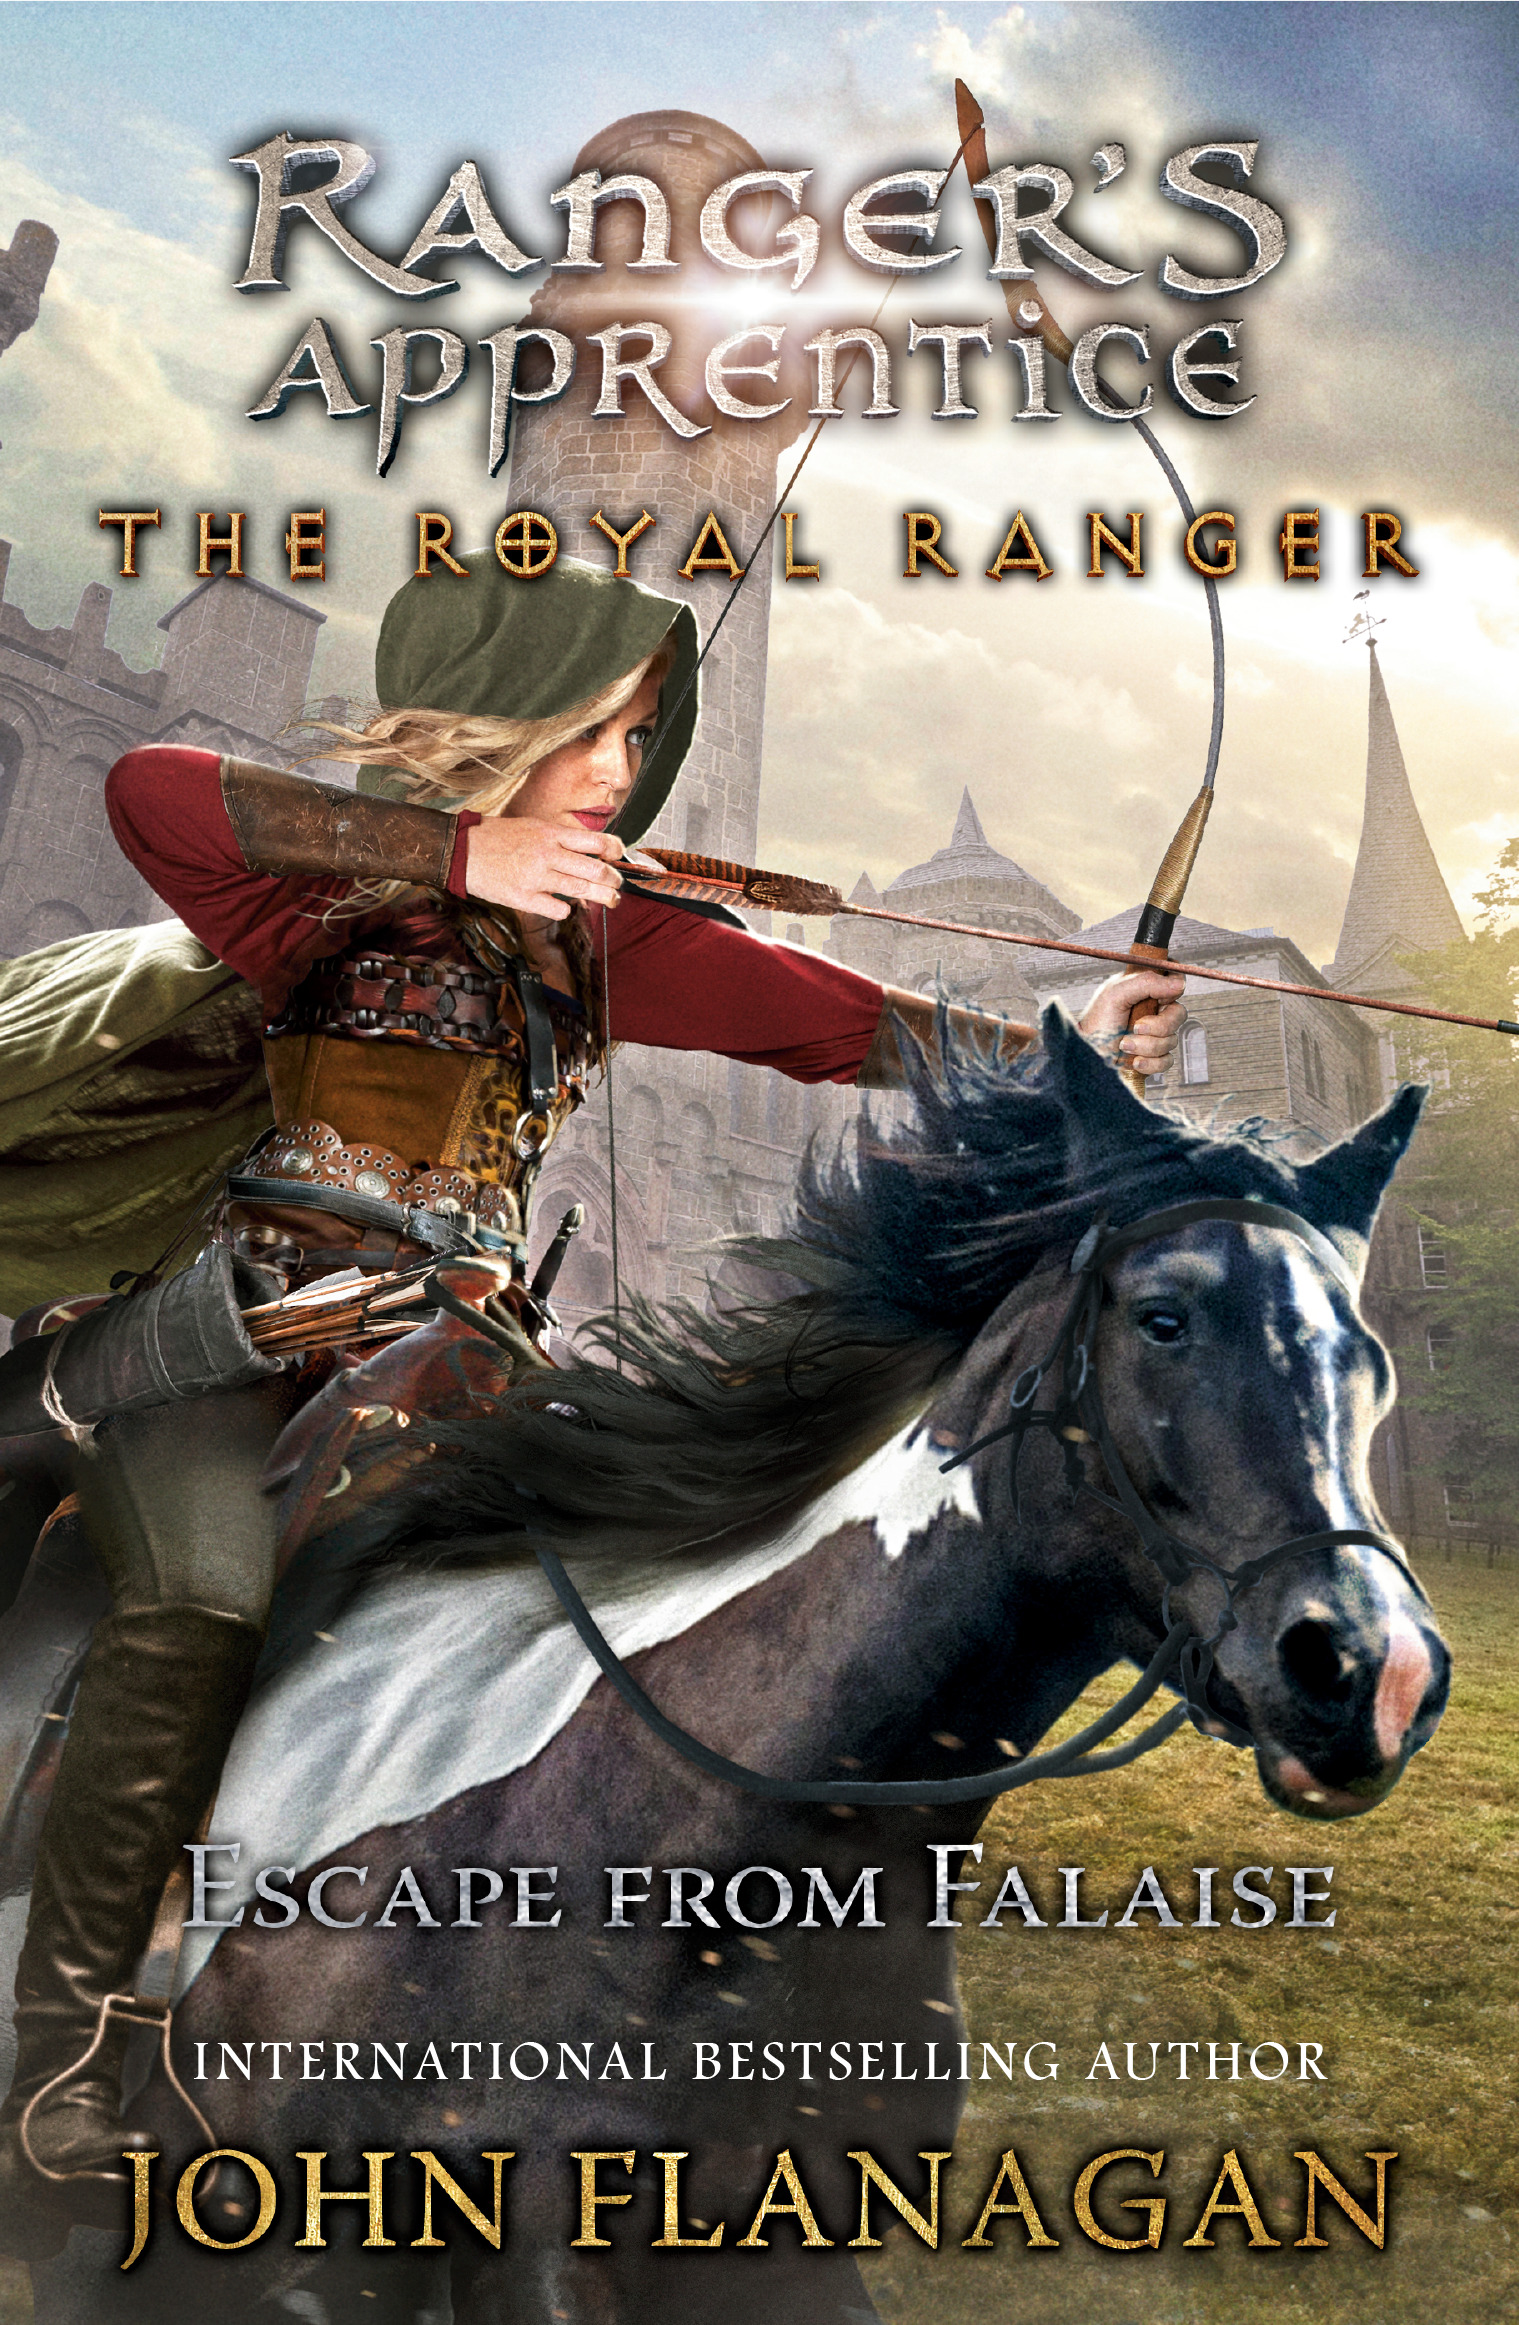 The Royal Ranger: Escape from Falaise | 9-12 years old